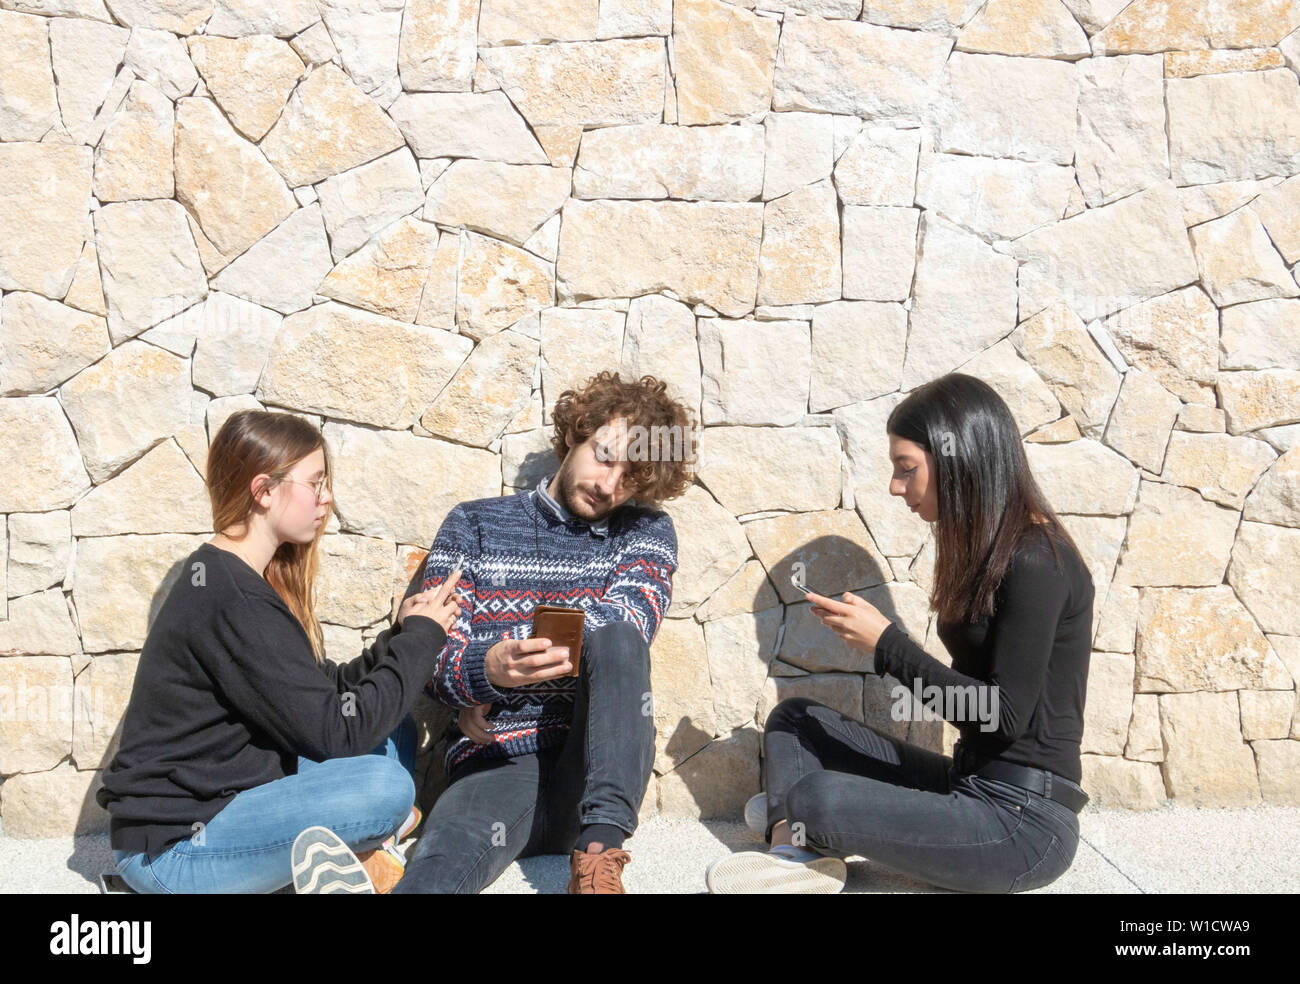 Social issue: Isolation due to addictive use of smartphones, connected way of life Stock Photo